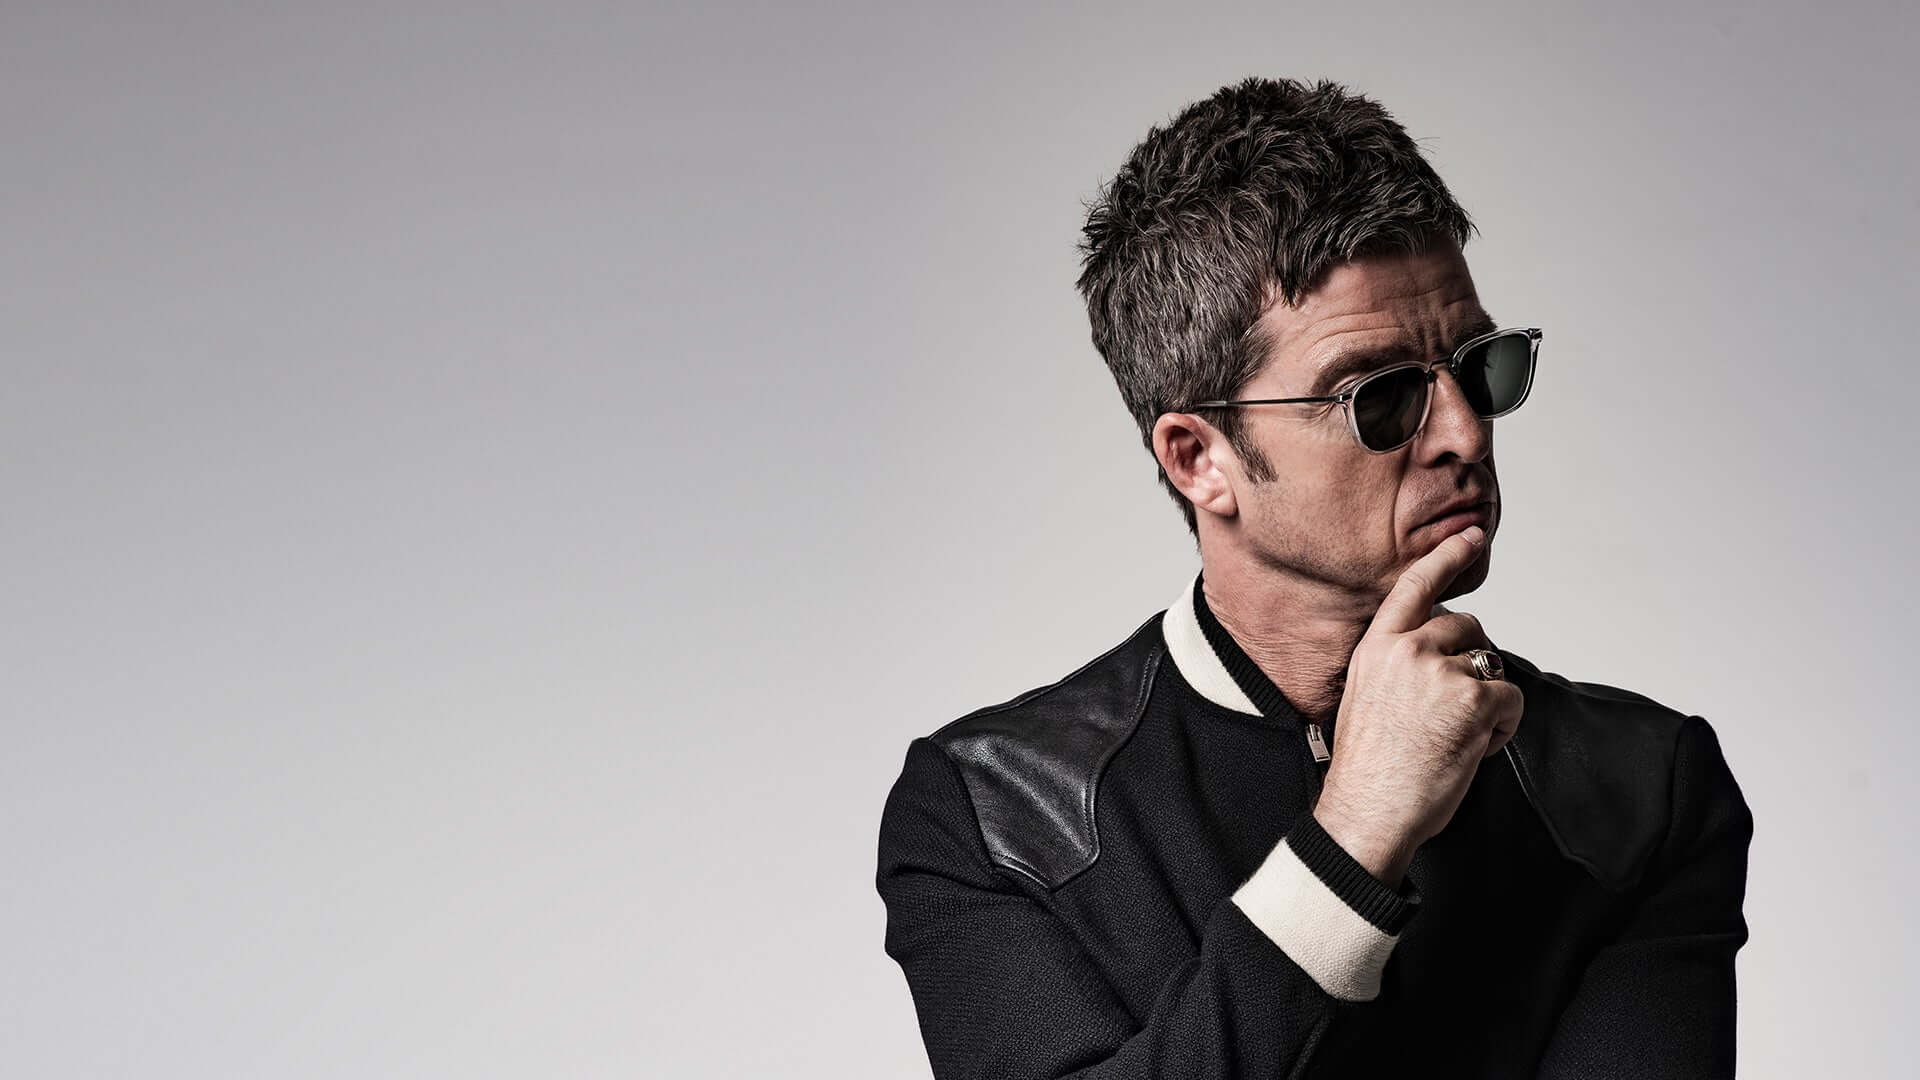 Noel Gallagher lanzó su nuevo single “Open the door, see what you find”